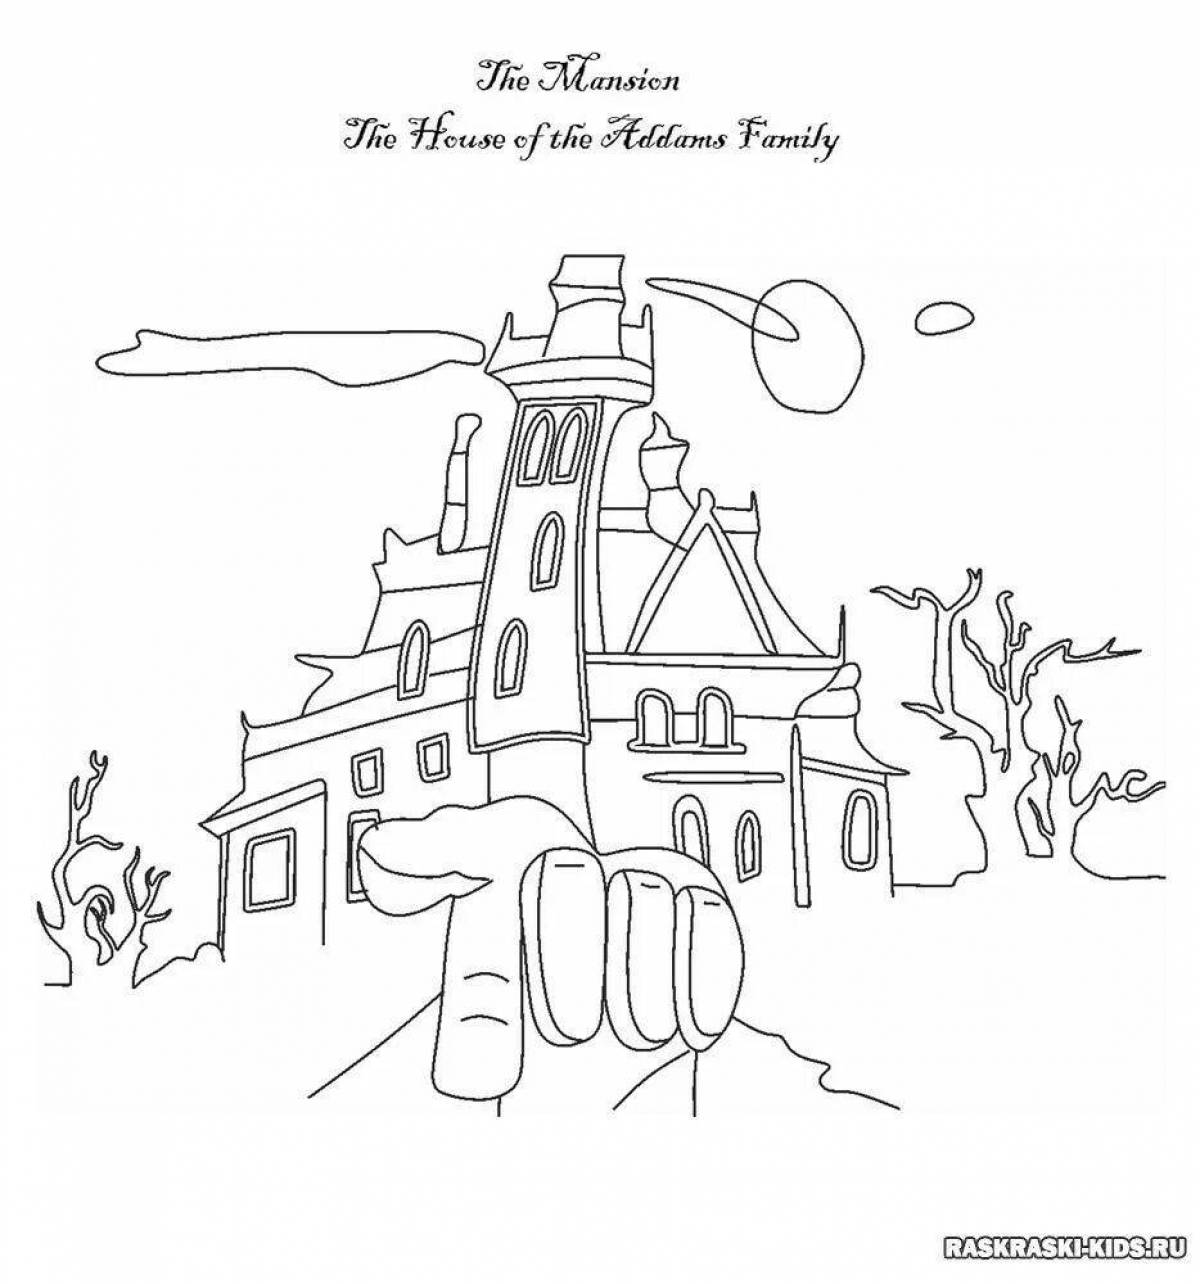 Cute addams family coloring pages for kids